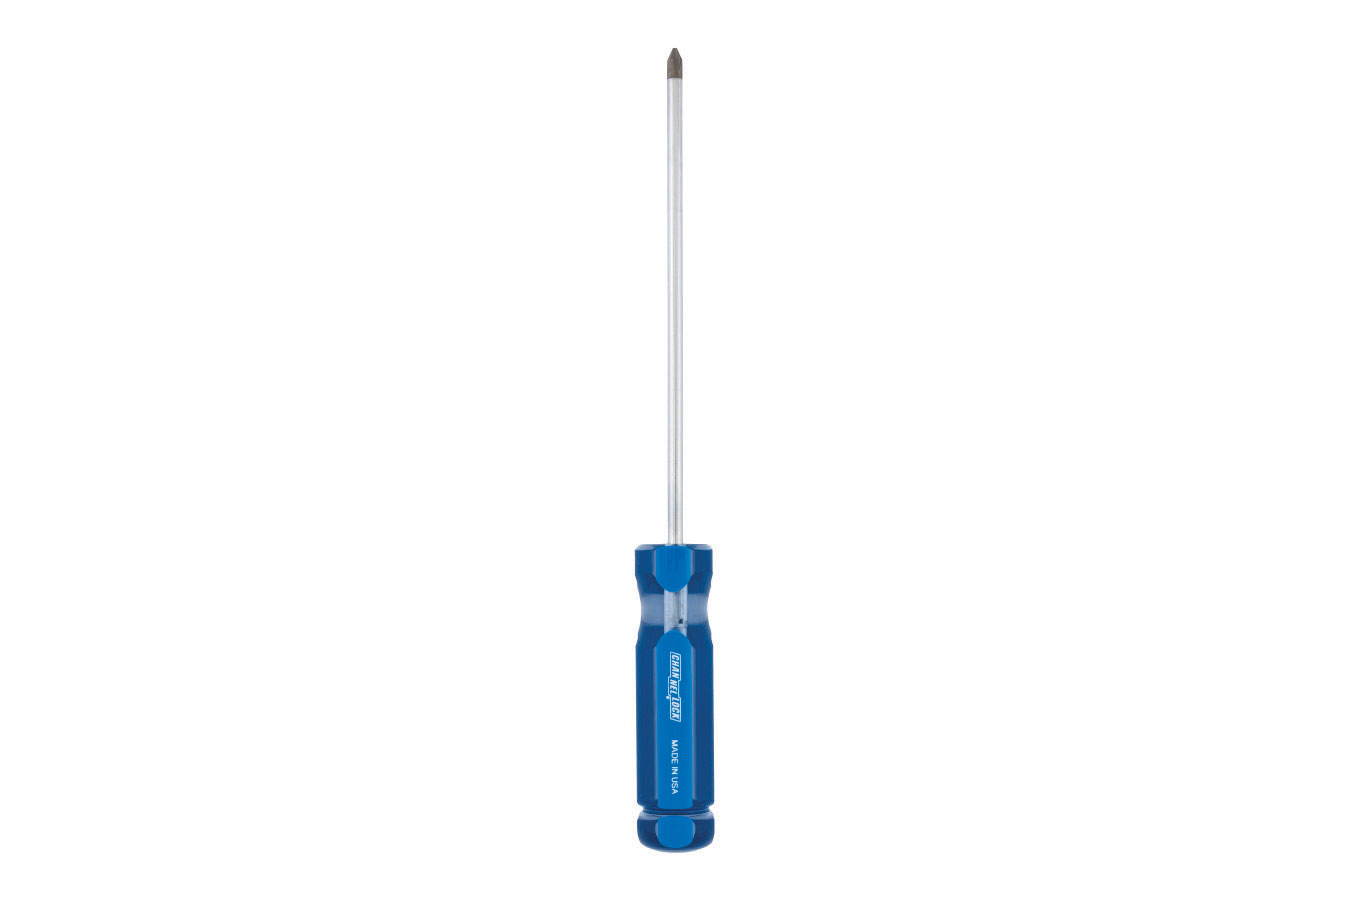 Blue and gray screwdriver. Image by Channellock.